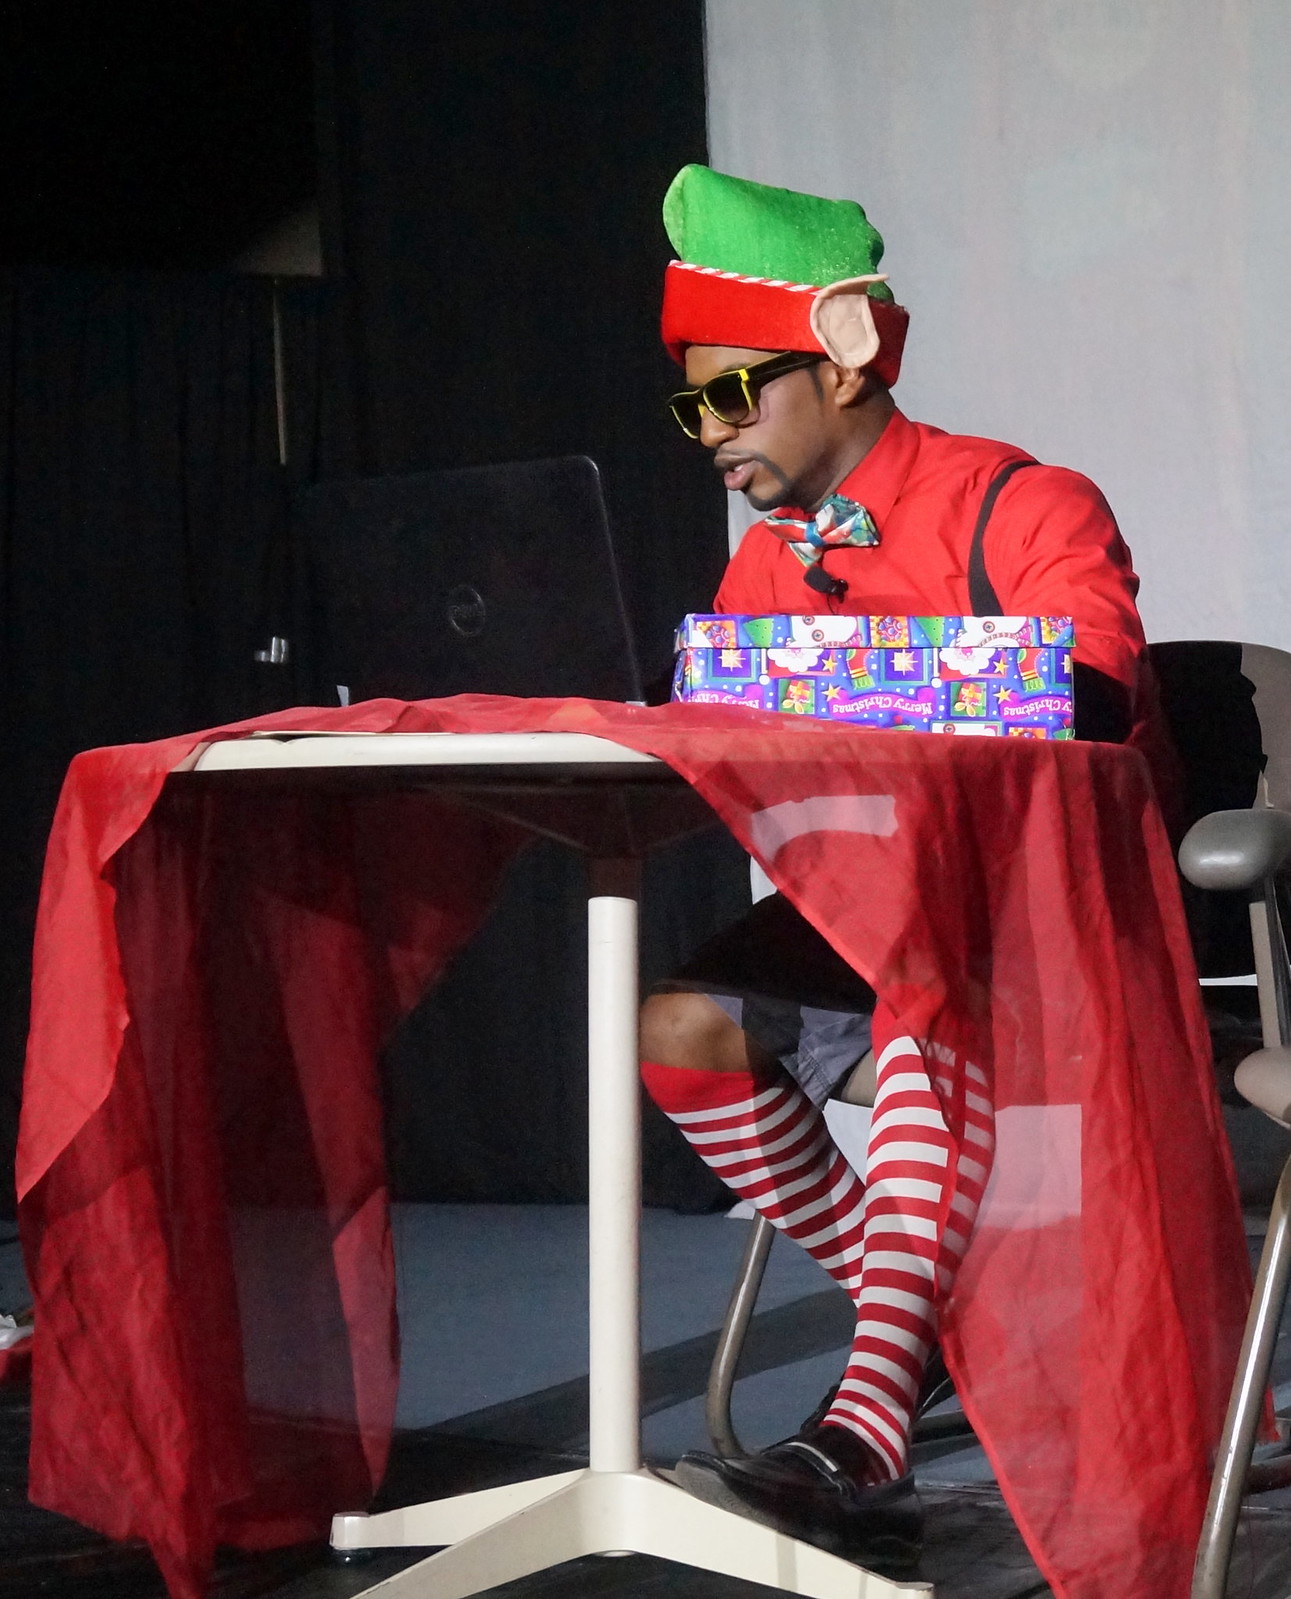 MEDICAL SCIENCES CHRISTMAS PLAY